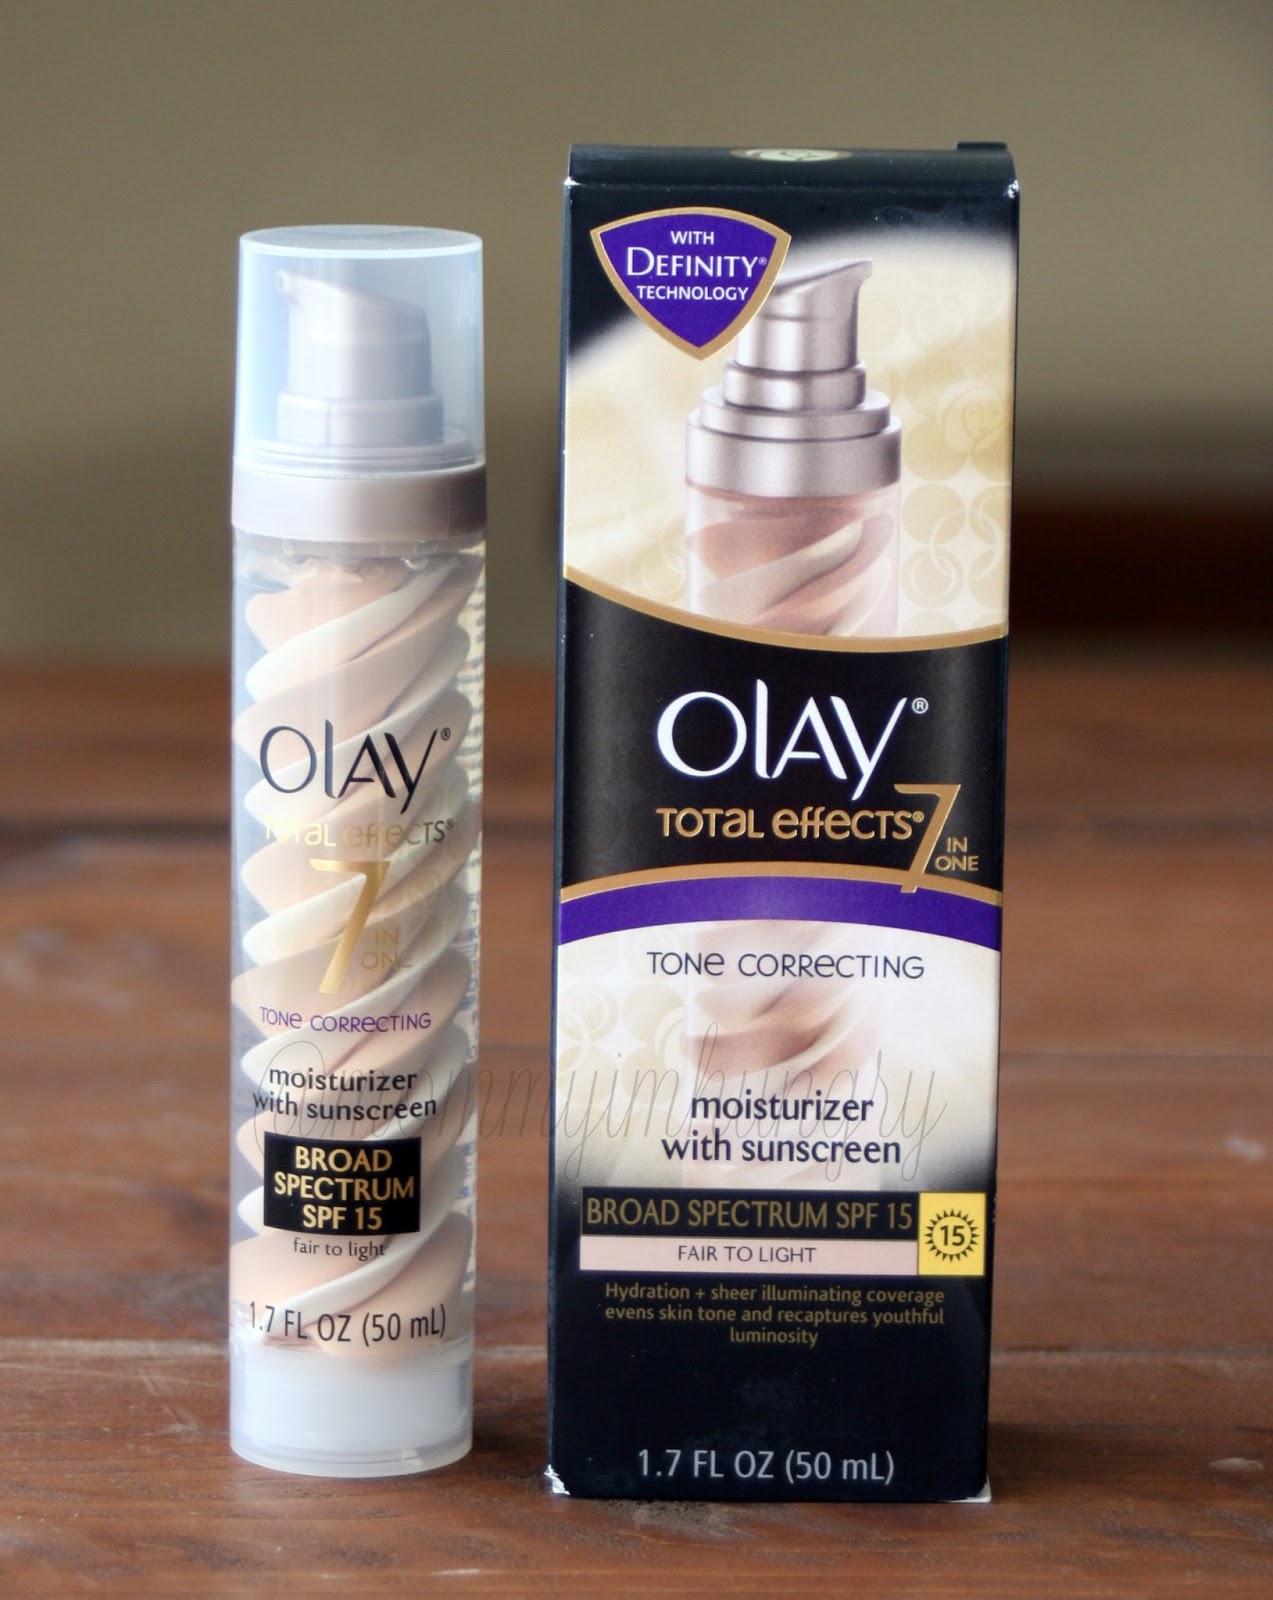 mih-product-reviews-giveaways-oil-of-olay-olay-total-effects-giveaway-and-review